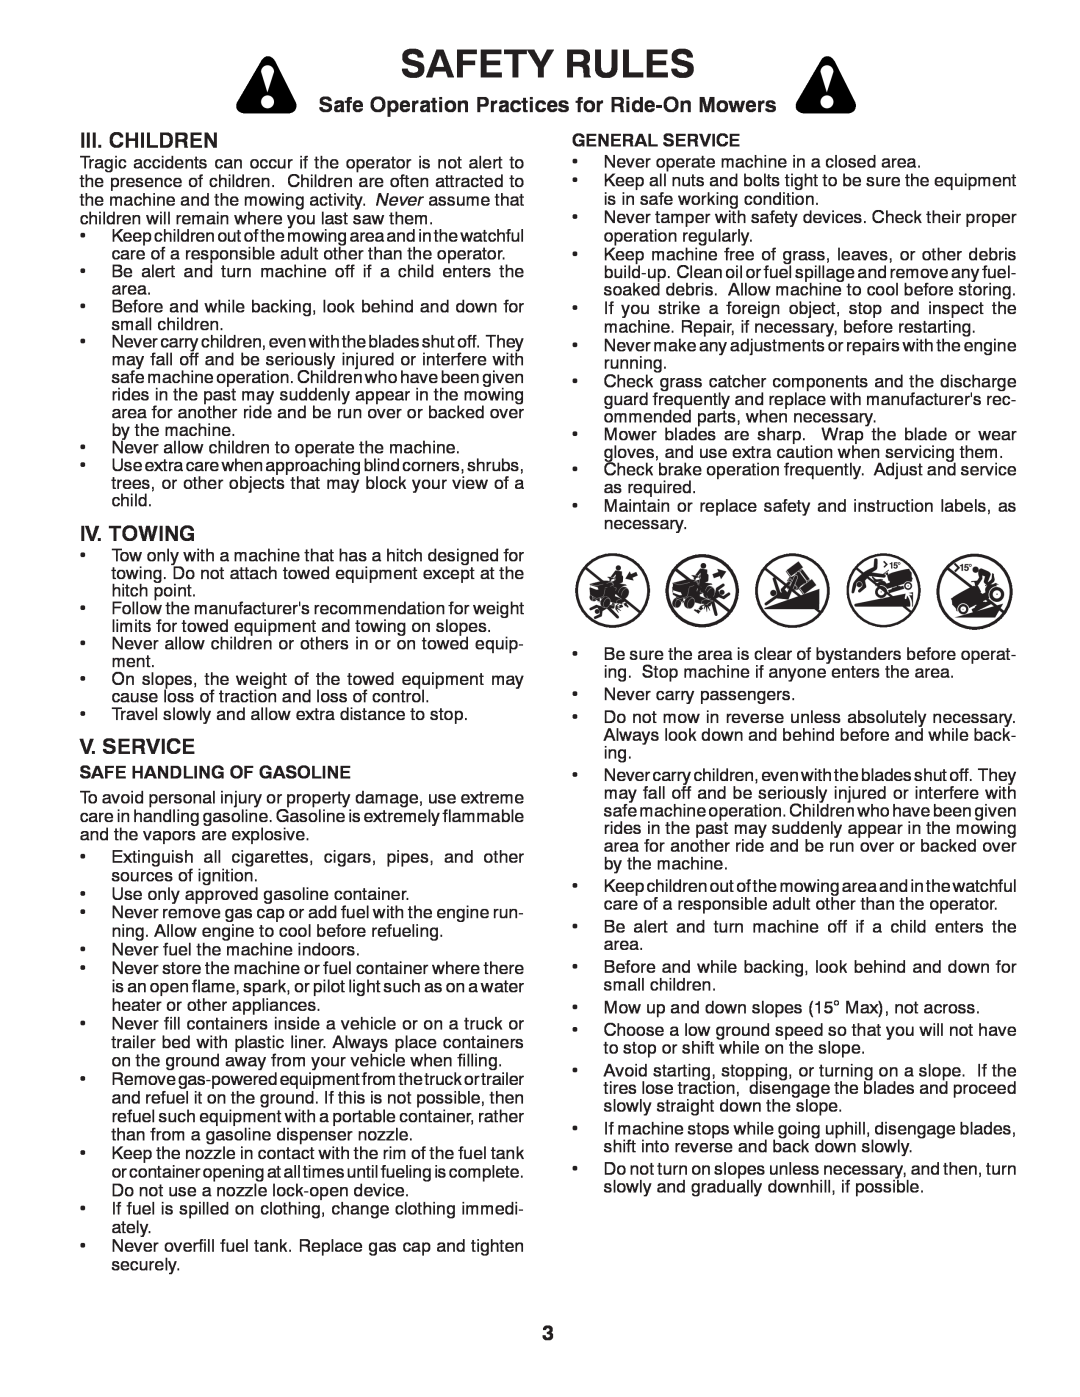 Poulan PBGT26H54 manual Iii. Children, Iv. Towing, V. Service, Safety Rules, Safe Operation Practices for Ride-On Mowers 